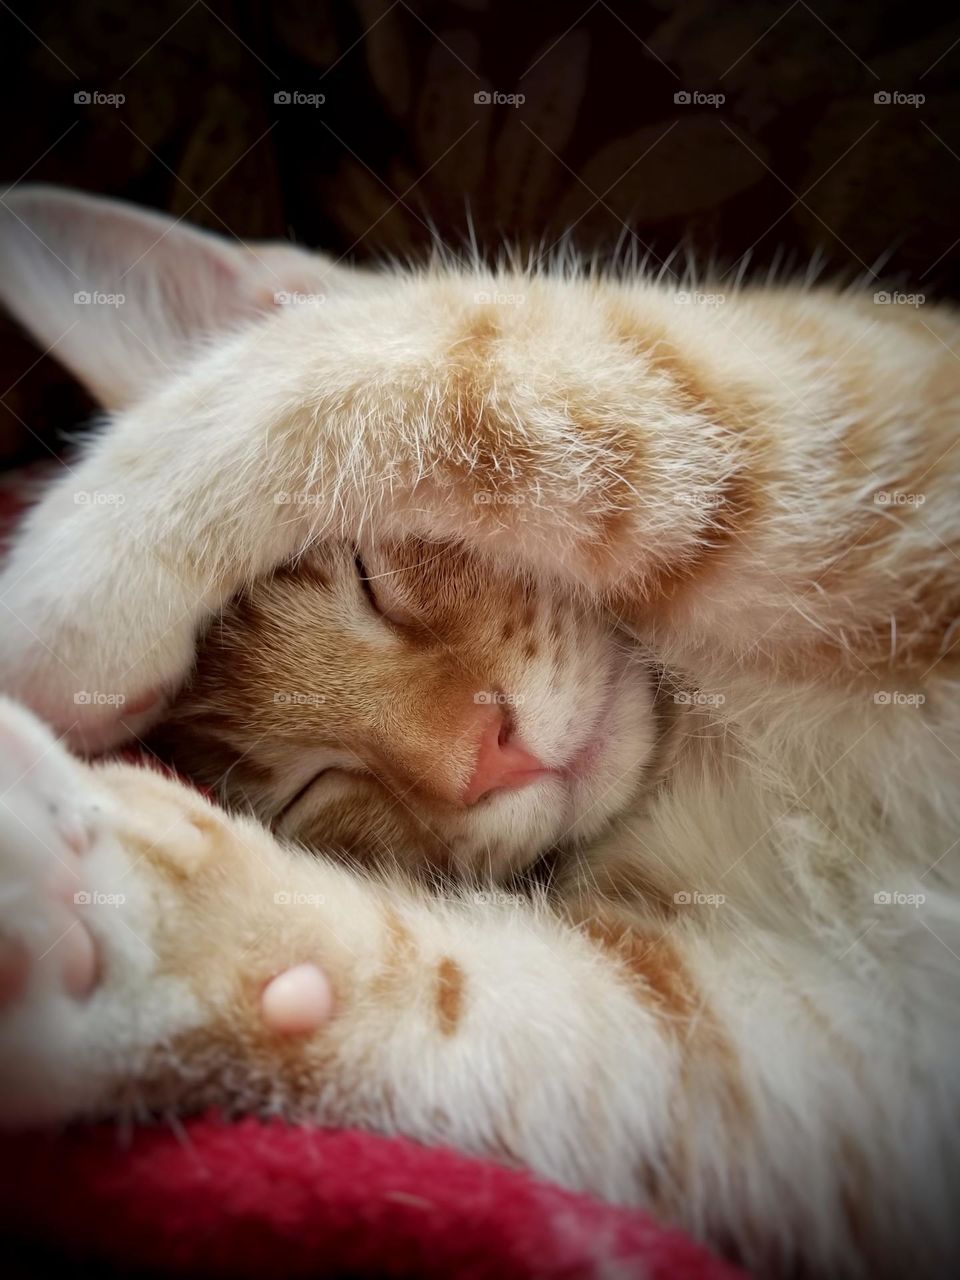 The Newest Member of Our Family, Sweet Orange & White Tabby 🐈 "Lilly" Kitten taking a Nap